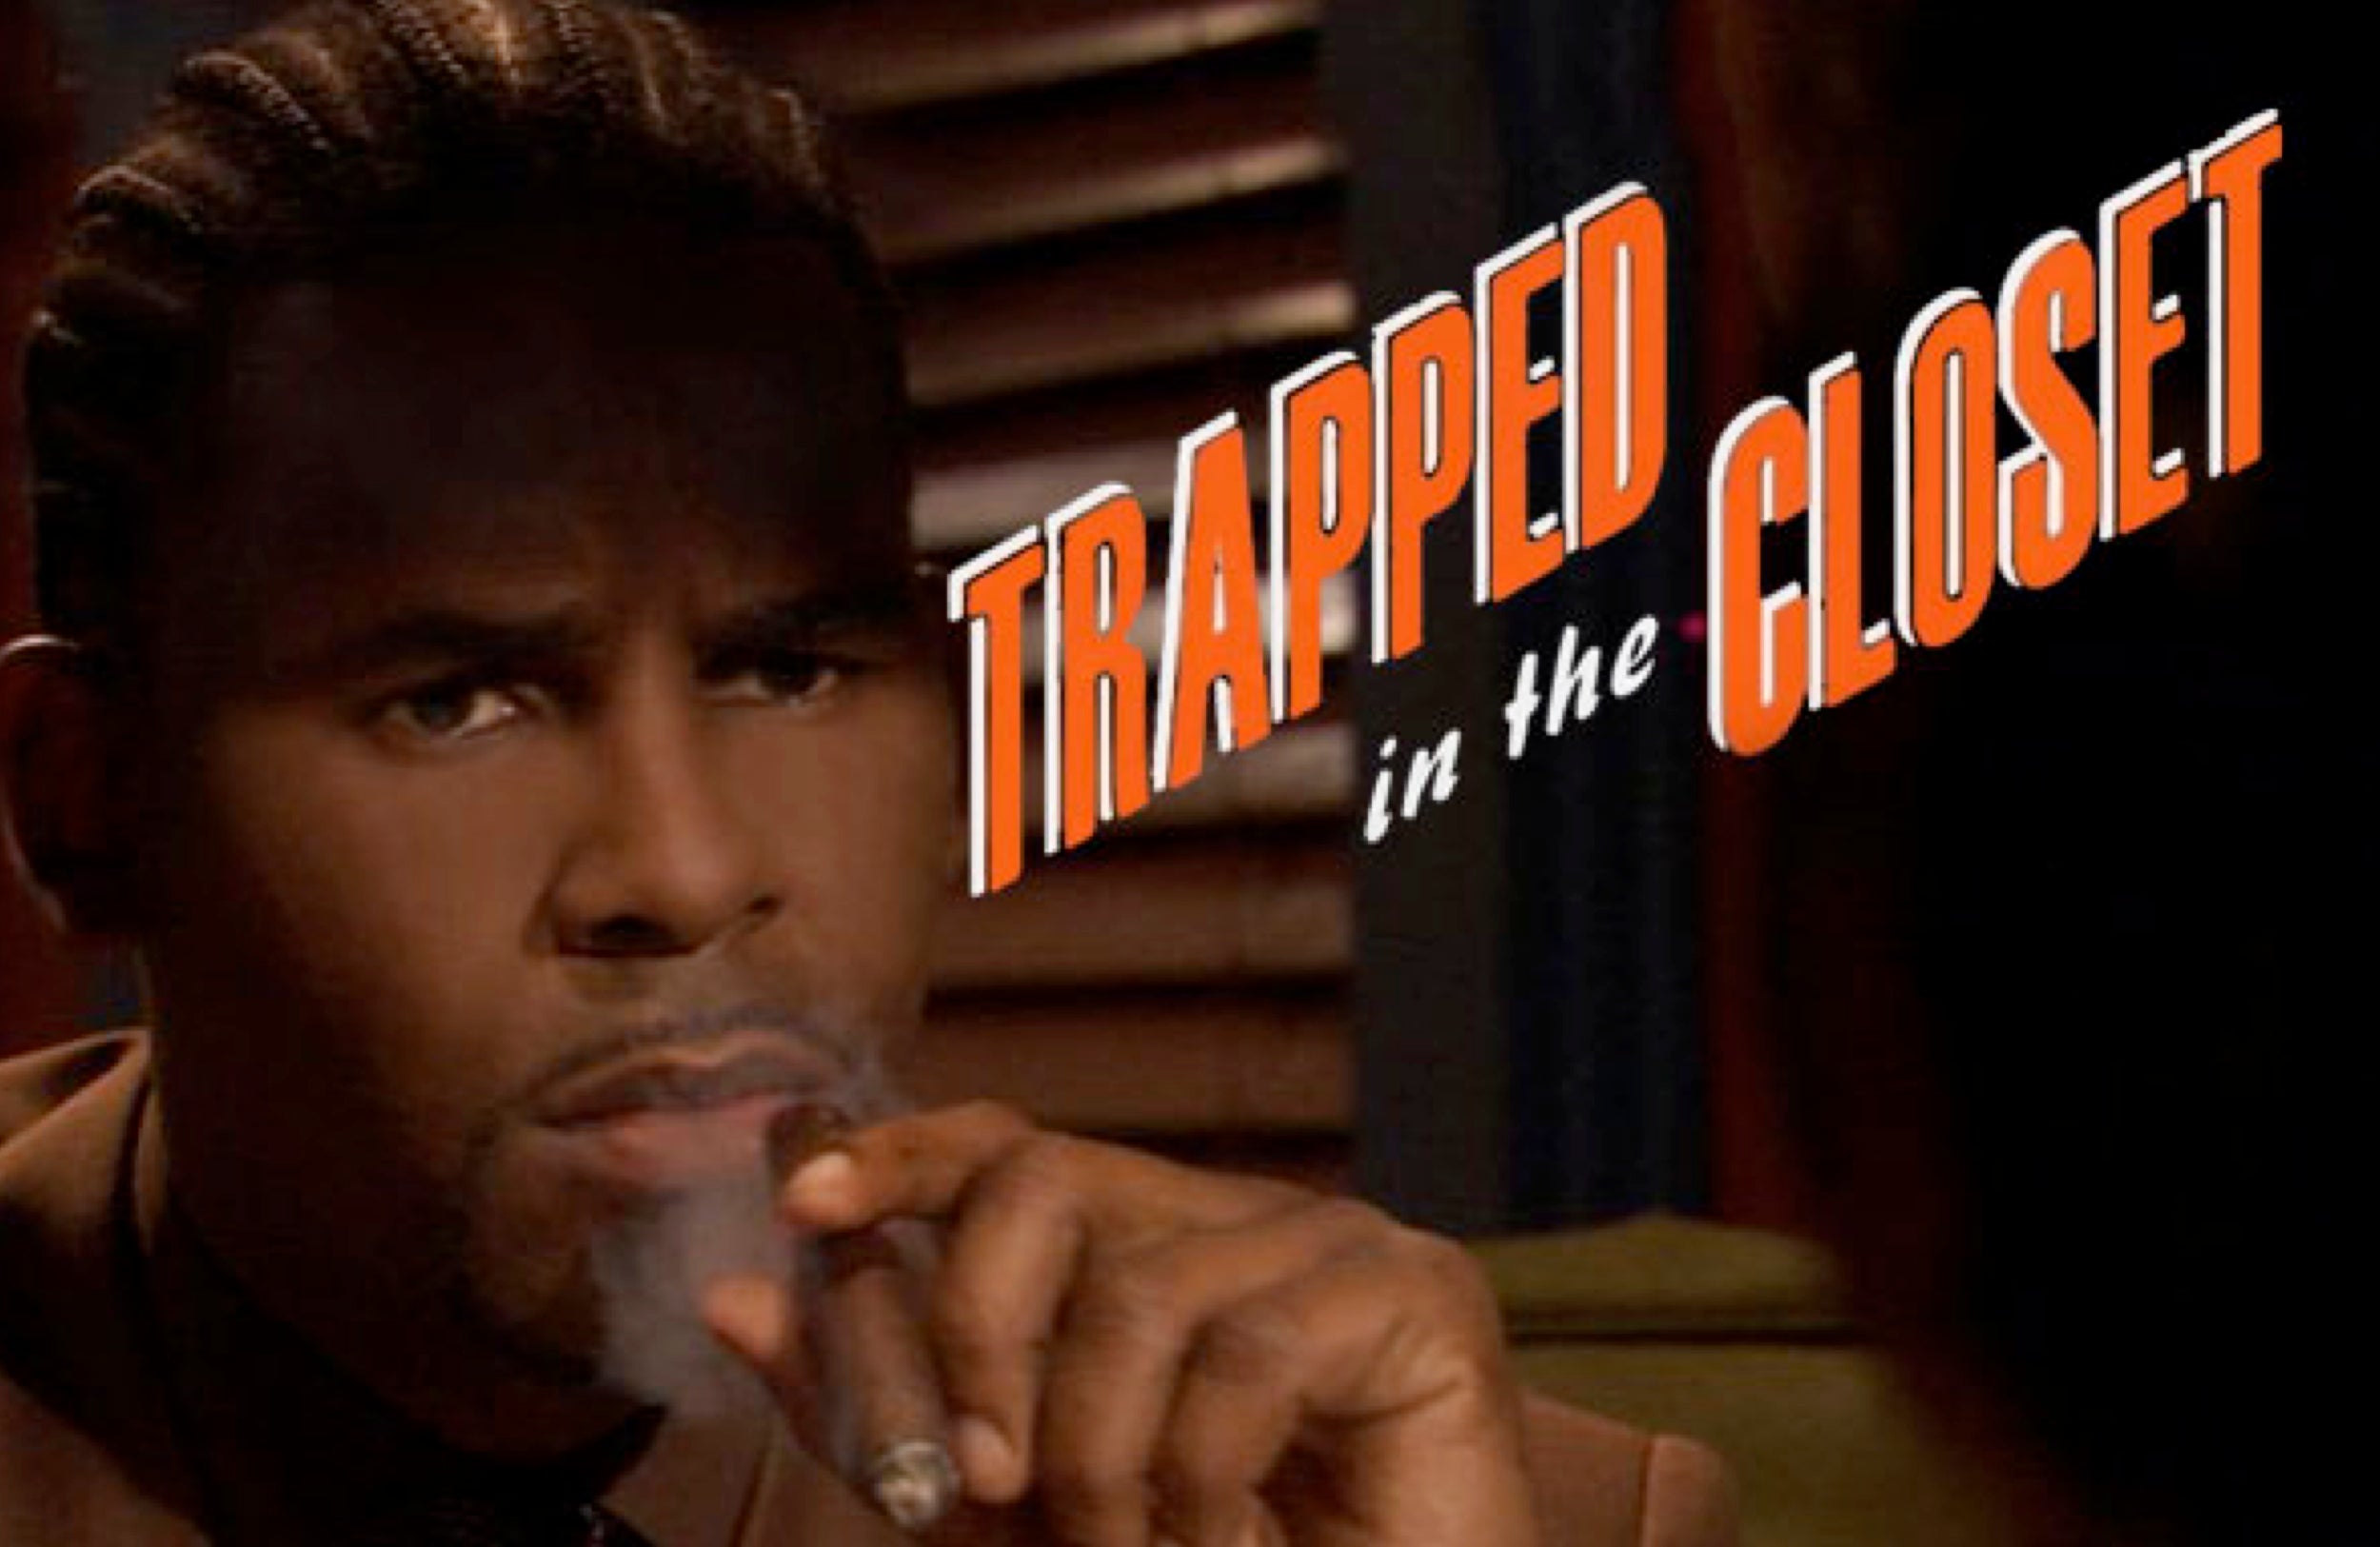 r kelly trapped in the closet full movie online free